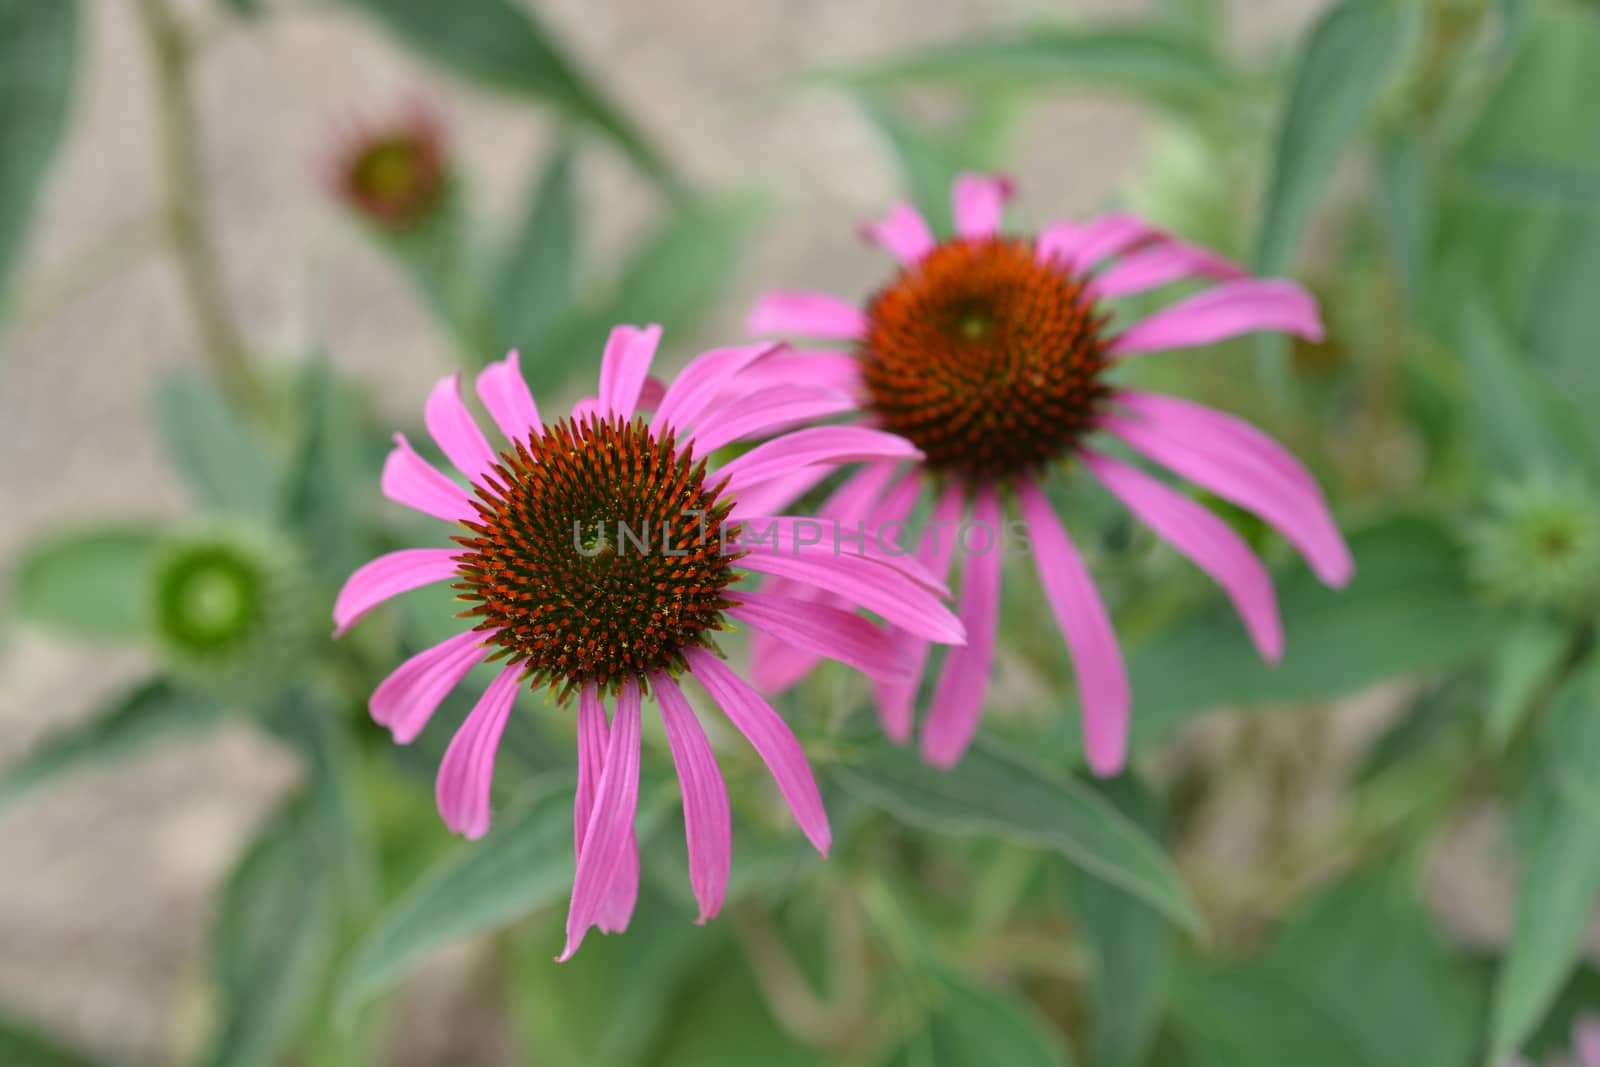 Coneflower Bright Star by nahhan